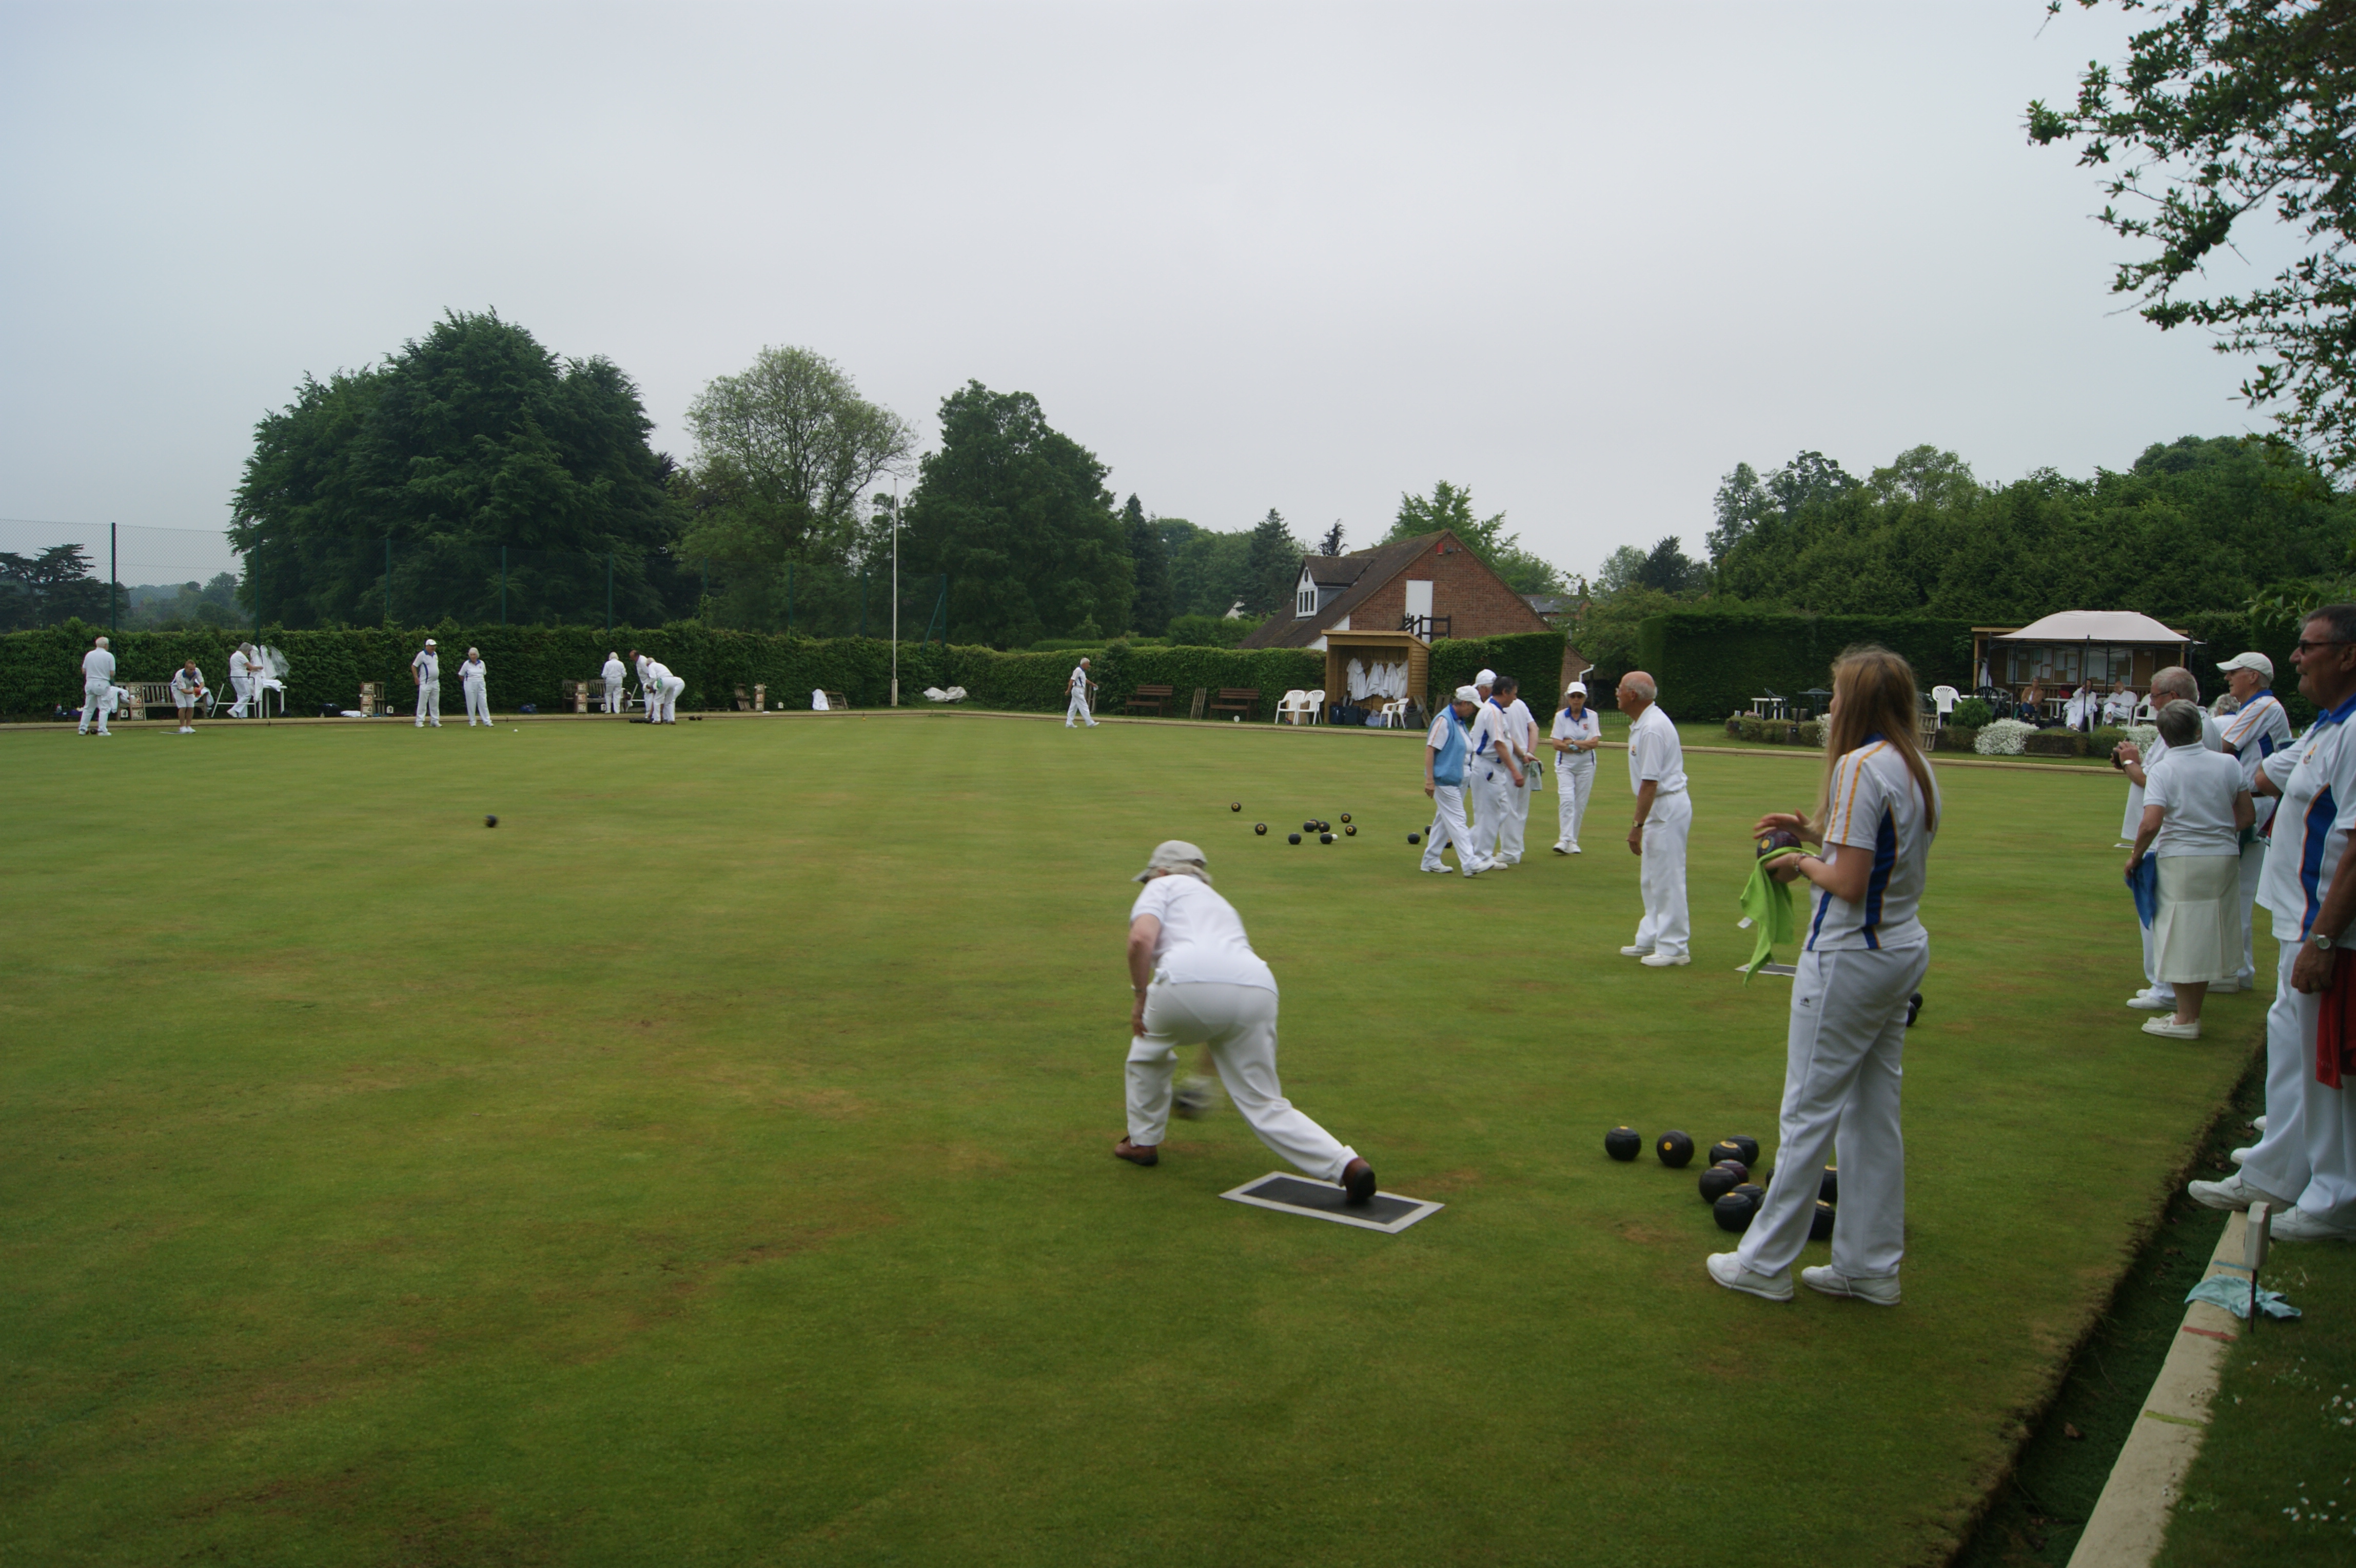 Winchester / New Forest Lawn Bowls Holidays